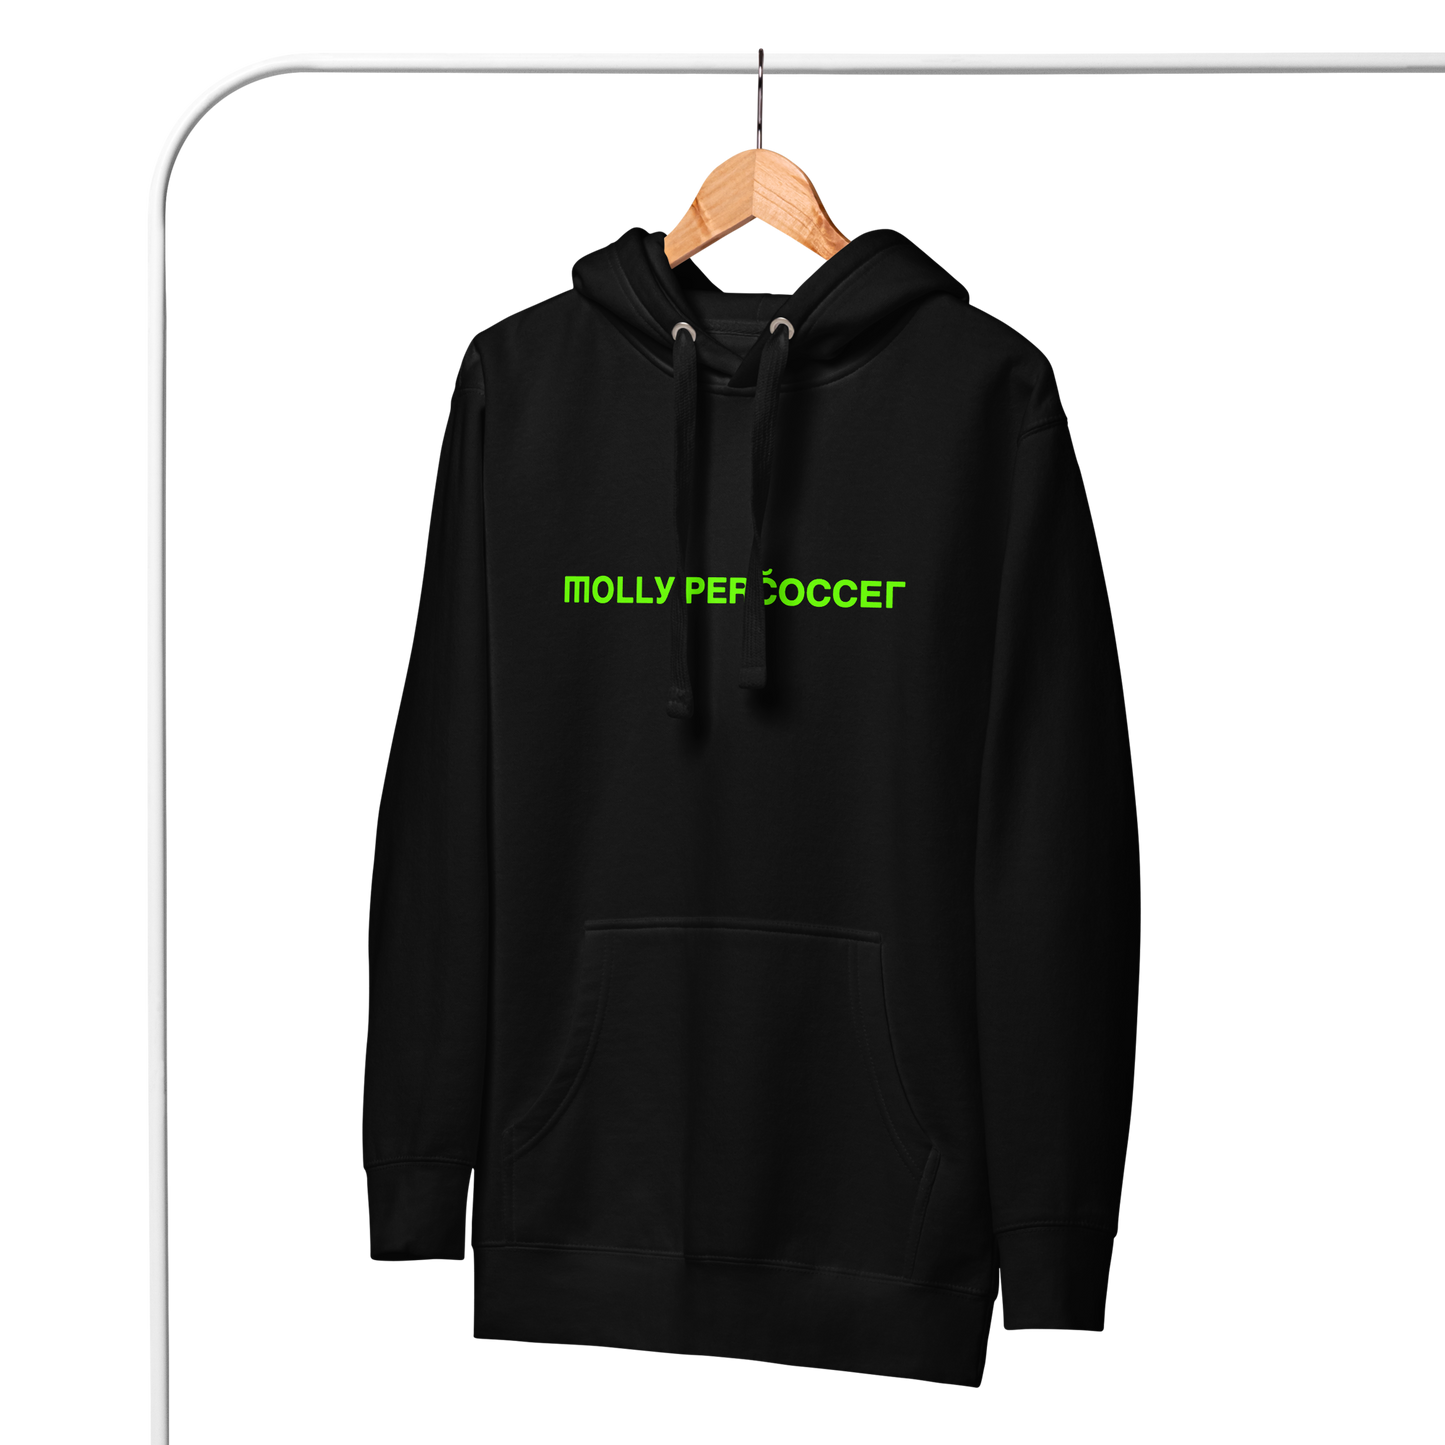 MOLLY PERCOCCET Black Hoodie